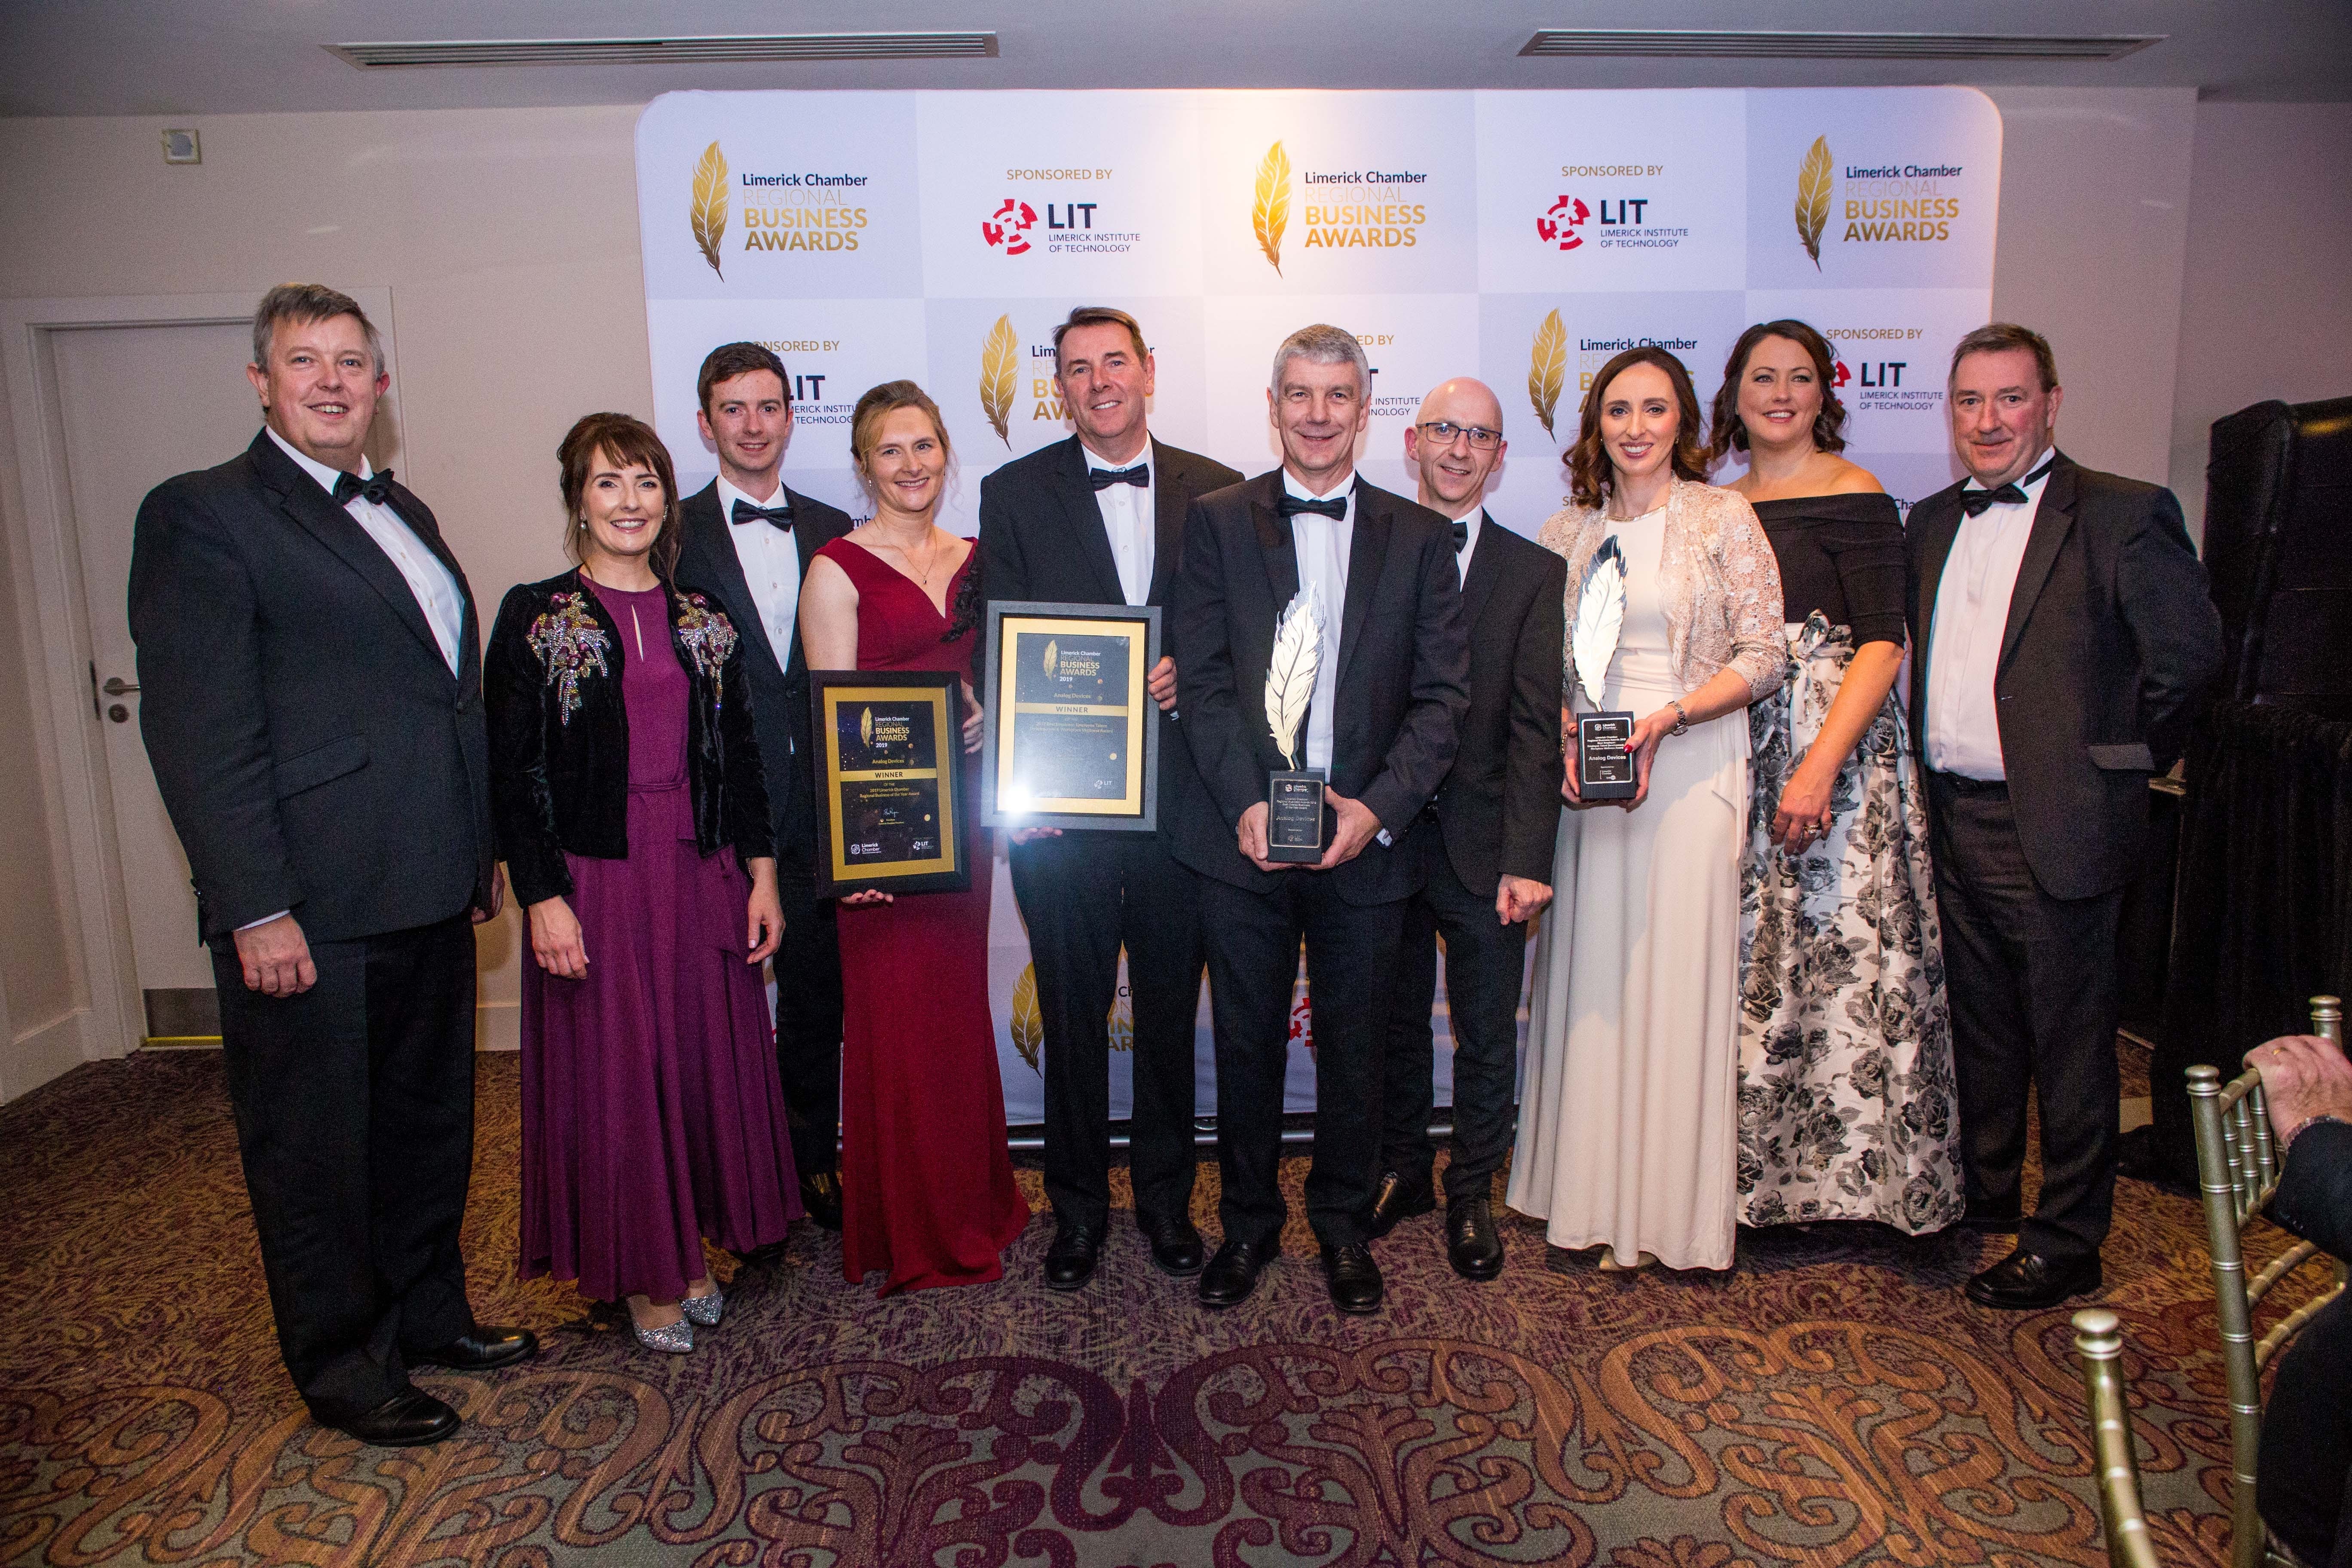 The Analog Devices team pictured with their Limerick Chamber Regional Business of the Year Award for 2019 at the Limerick Chamber President's Dinner. Photo: Cian Reinhardt